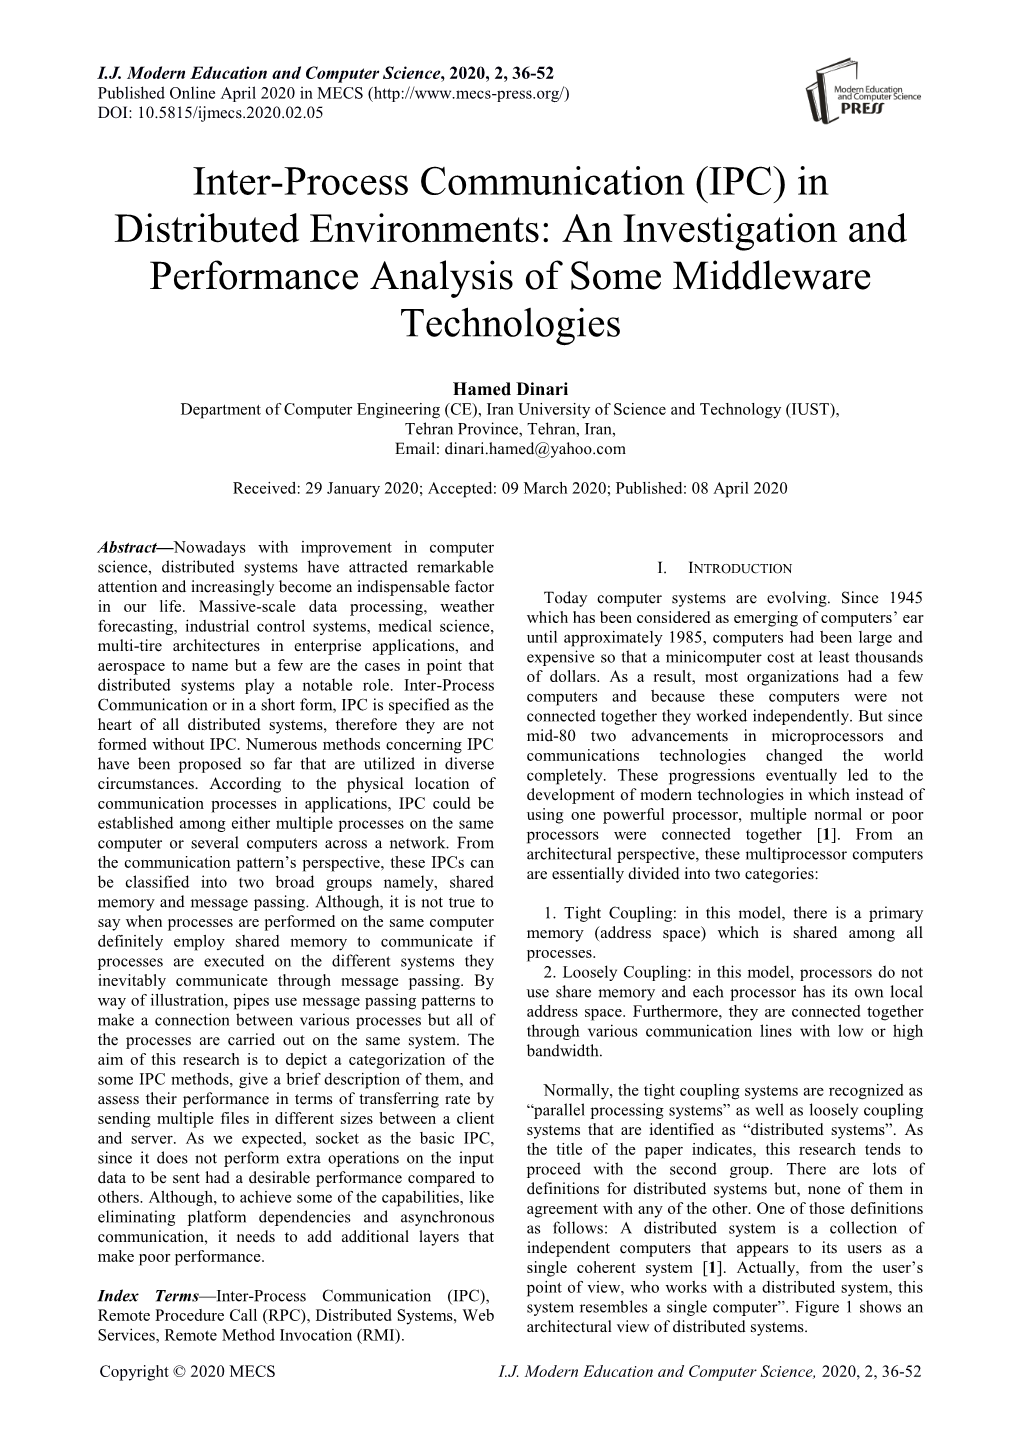 Inter-Process Communication (IPC) in Distributed Environments: an Investigation and Performance Analysis of Some Middleware Technologies